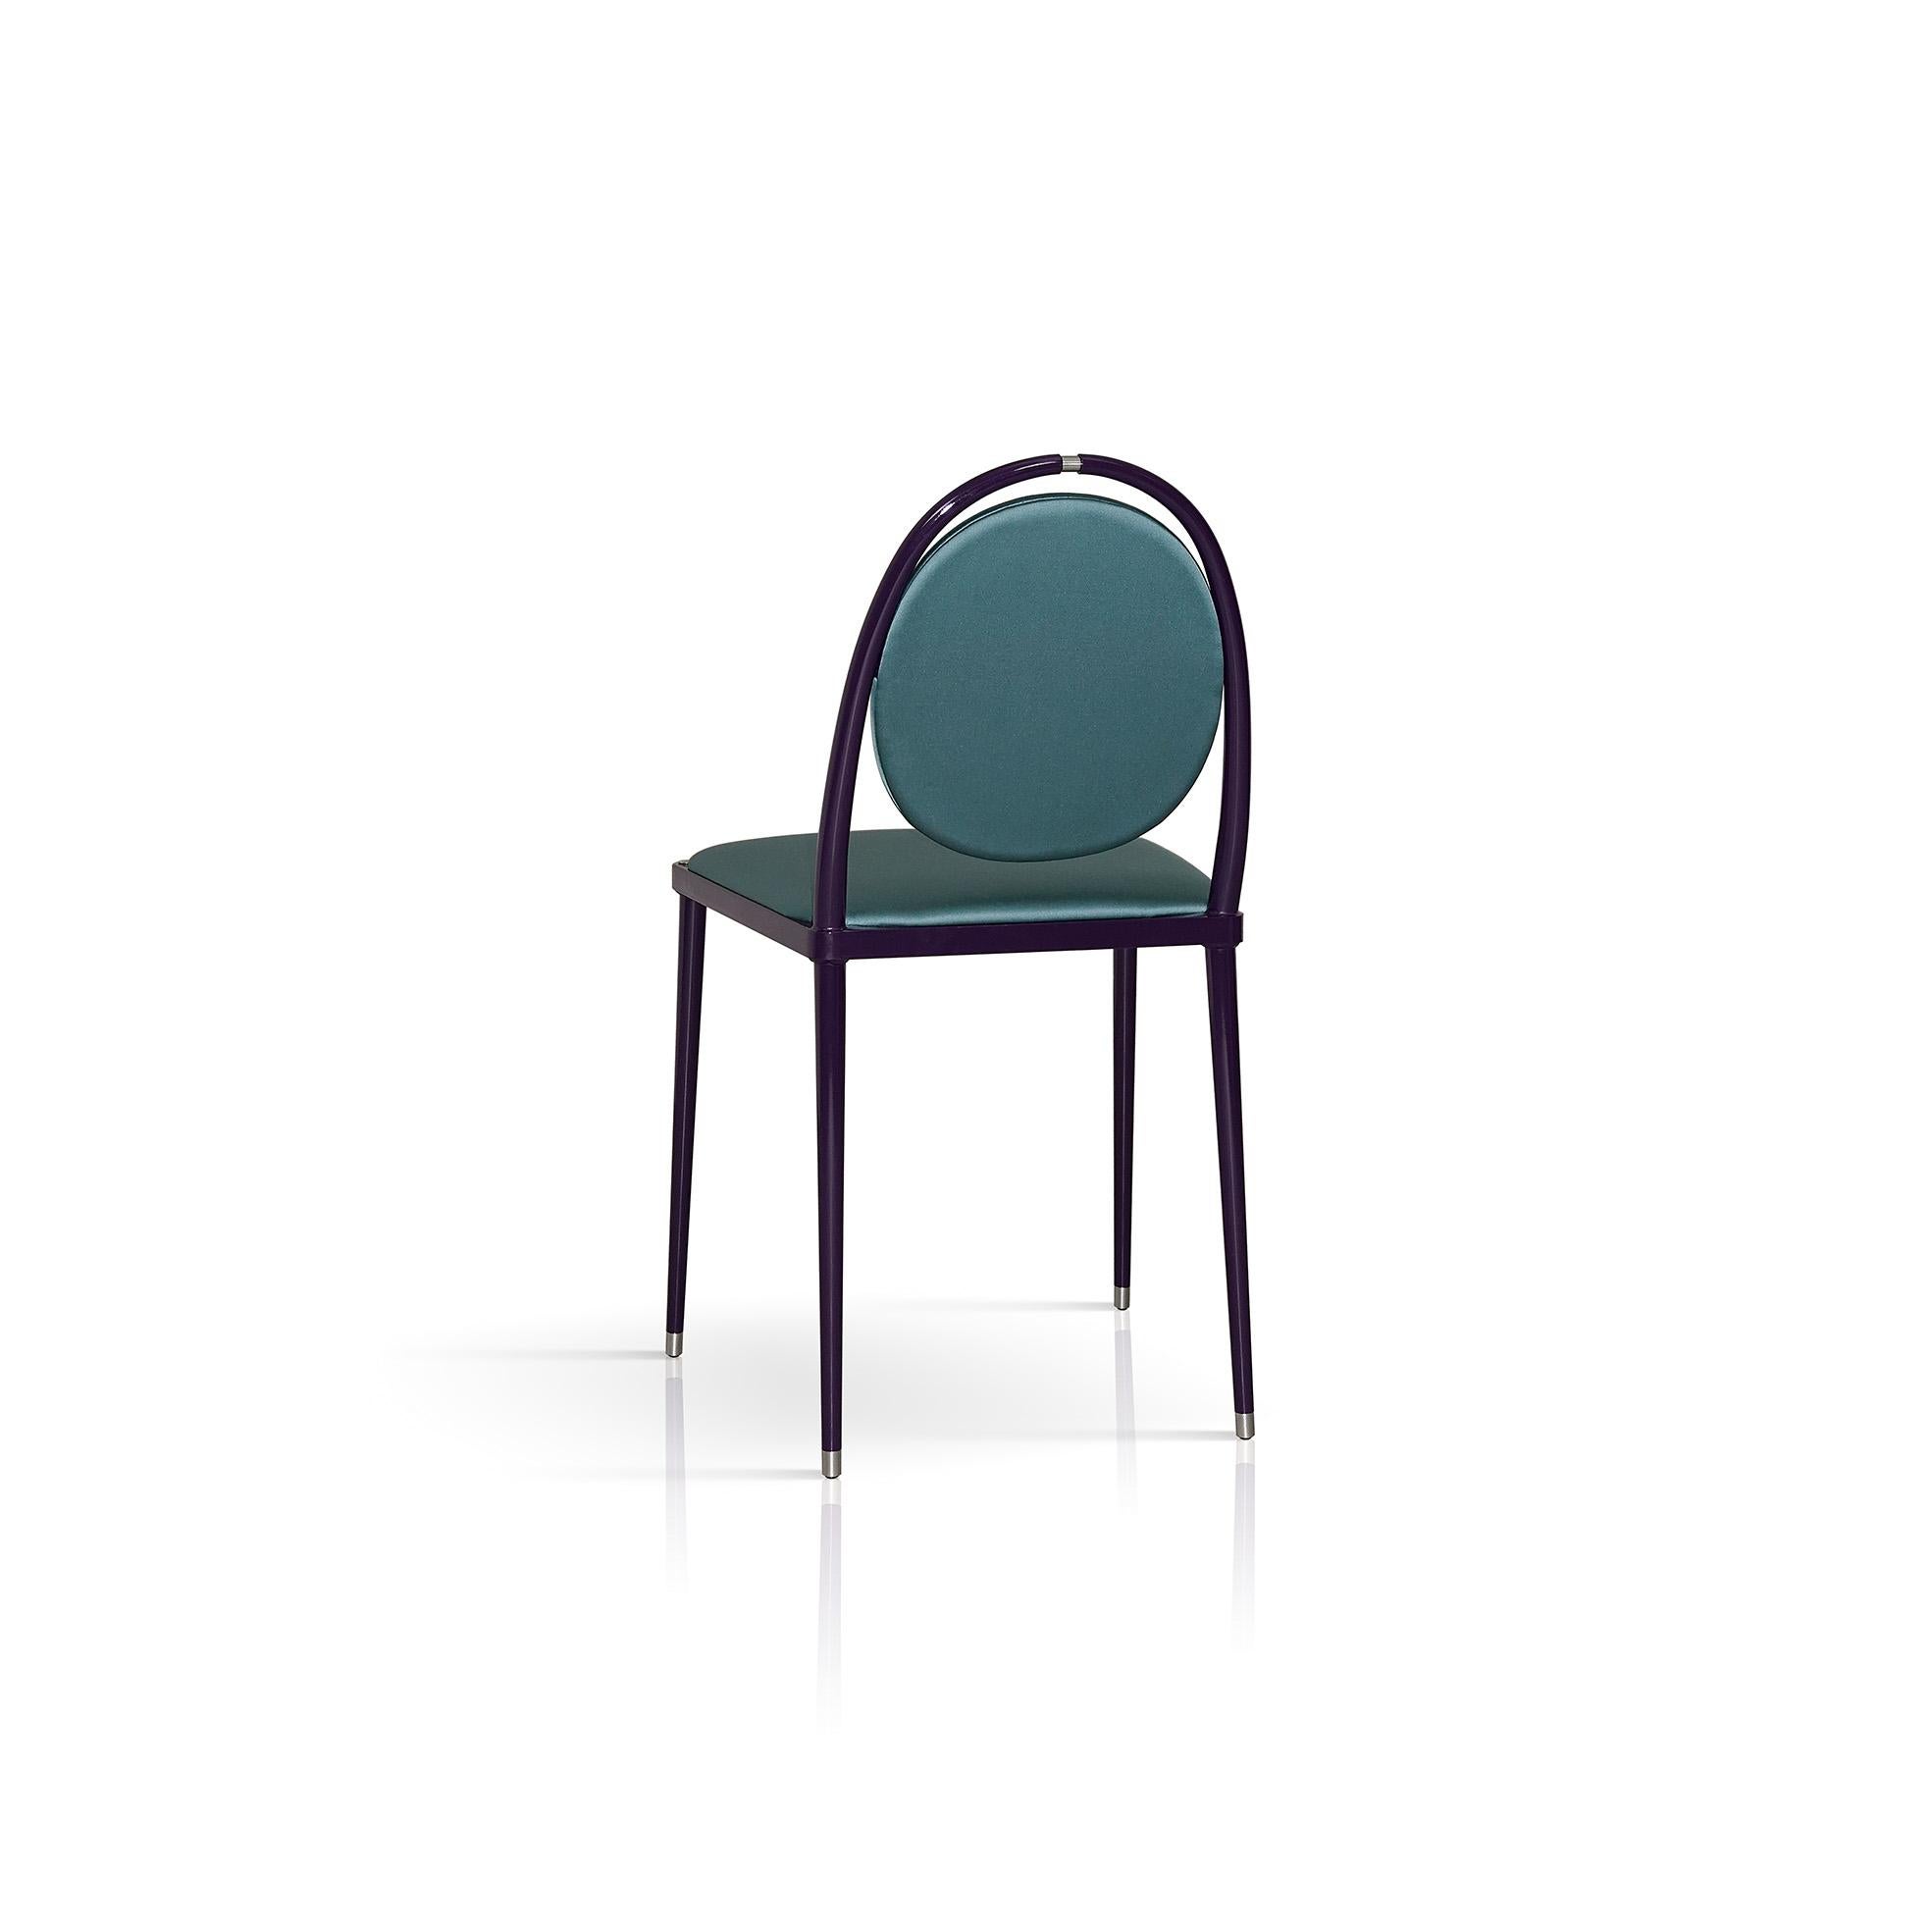 The upholstered medallion backrest and voluminous square seat are the truly outstanding elements of this modern chair whose clean and delicate design characterizes the Balzaretti series. Raised on a slender yet sturdy metal frame with an